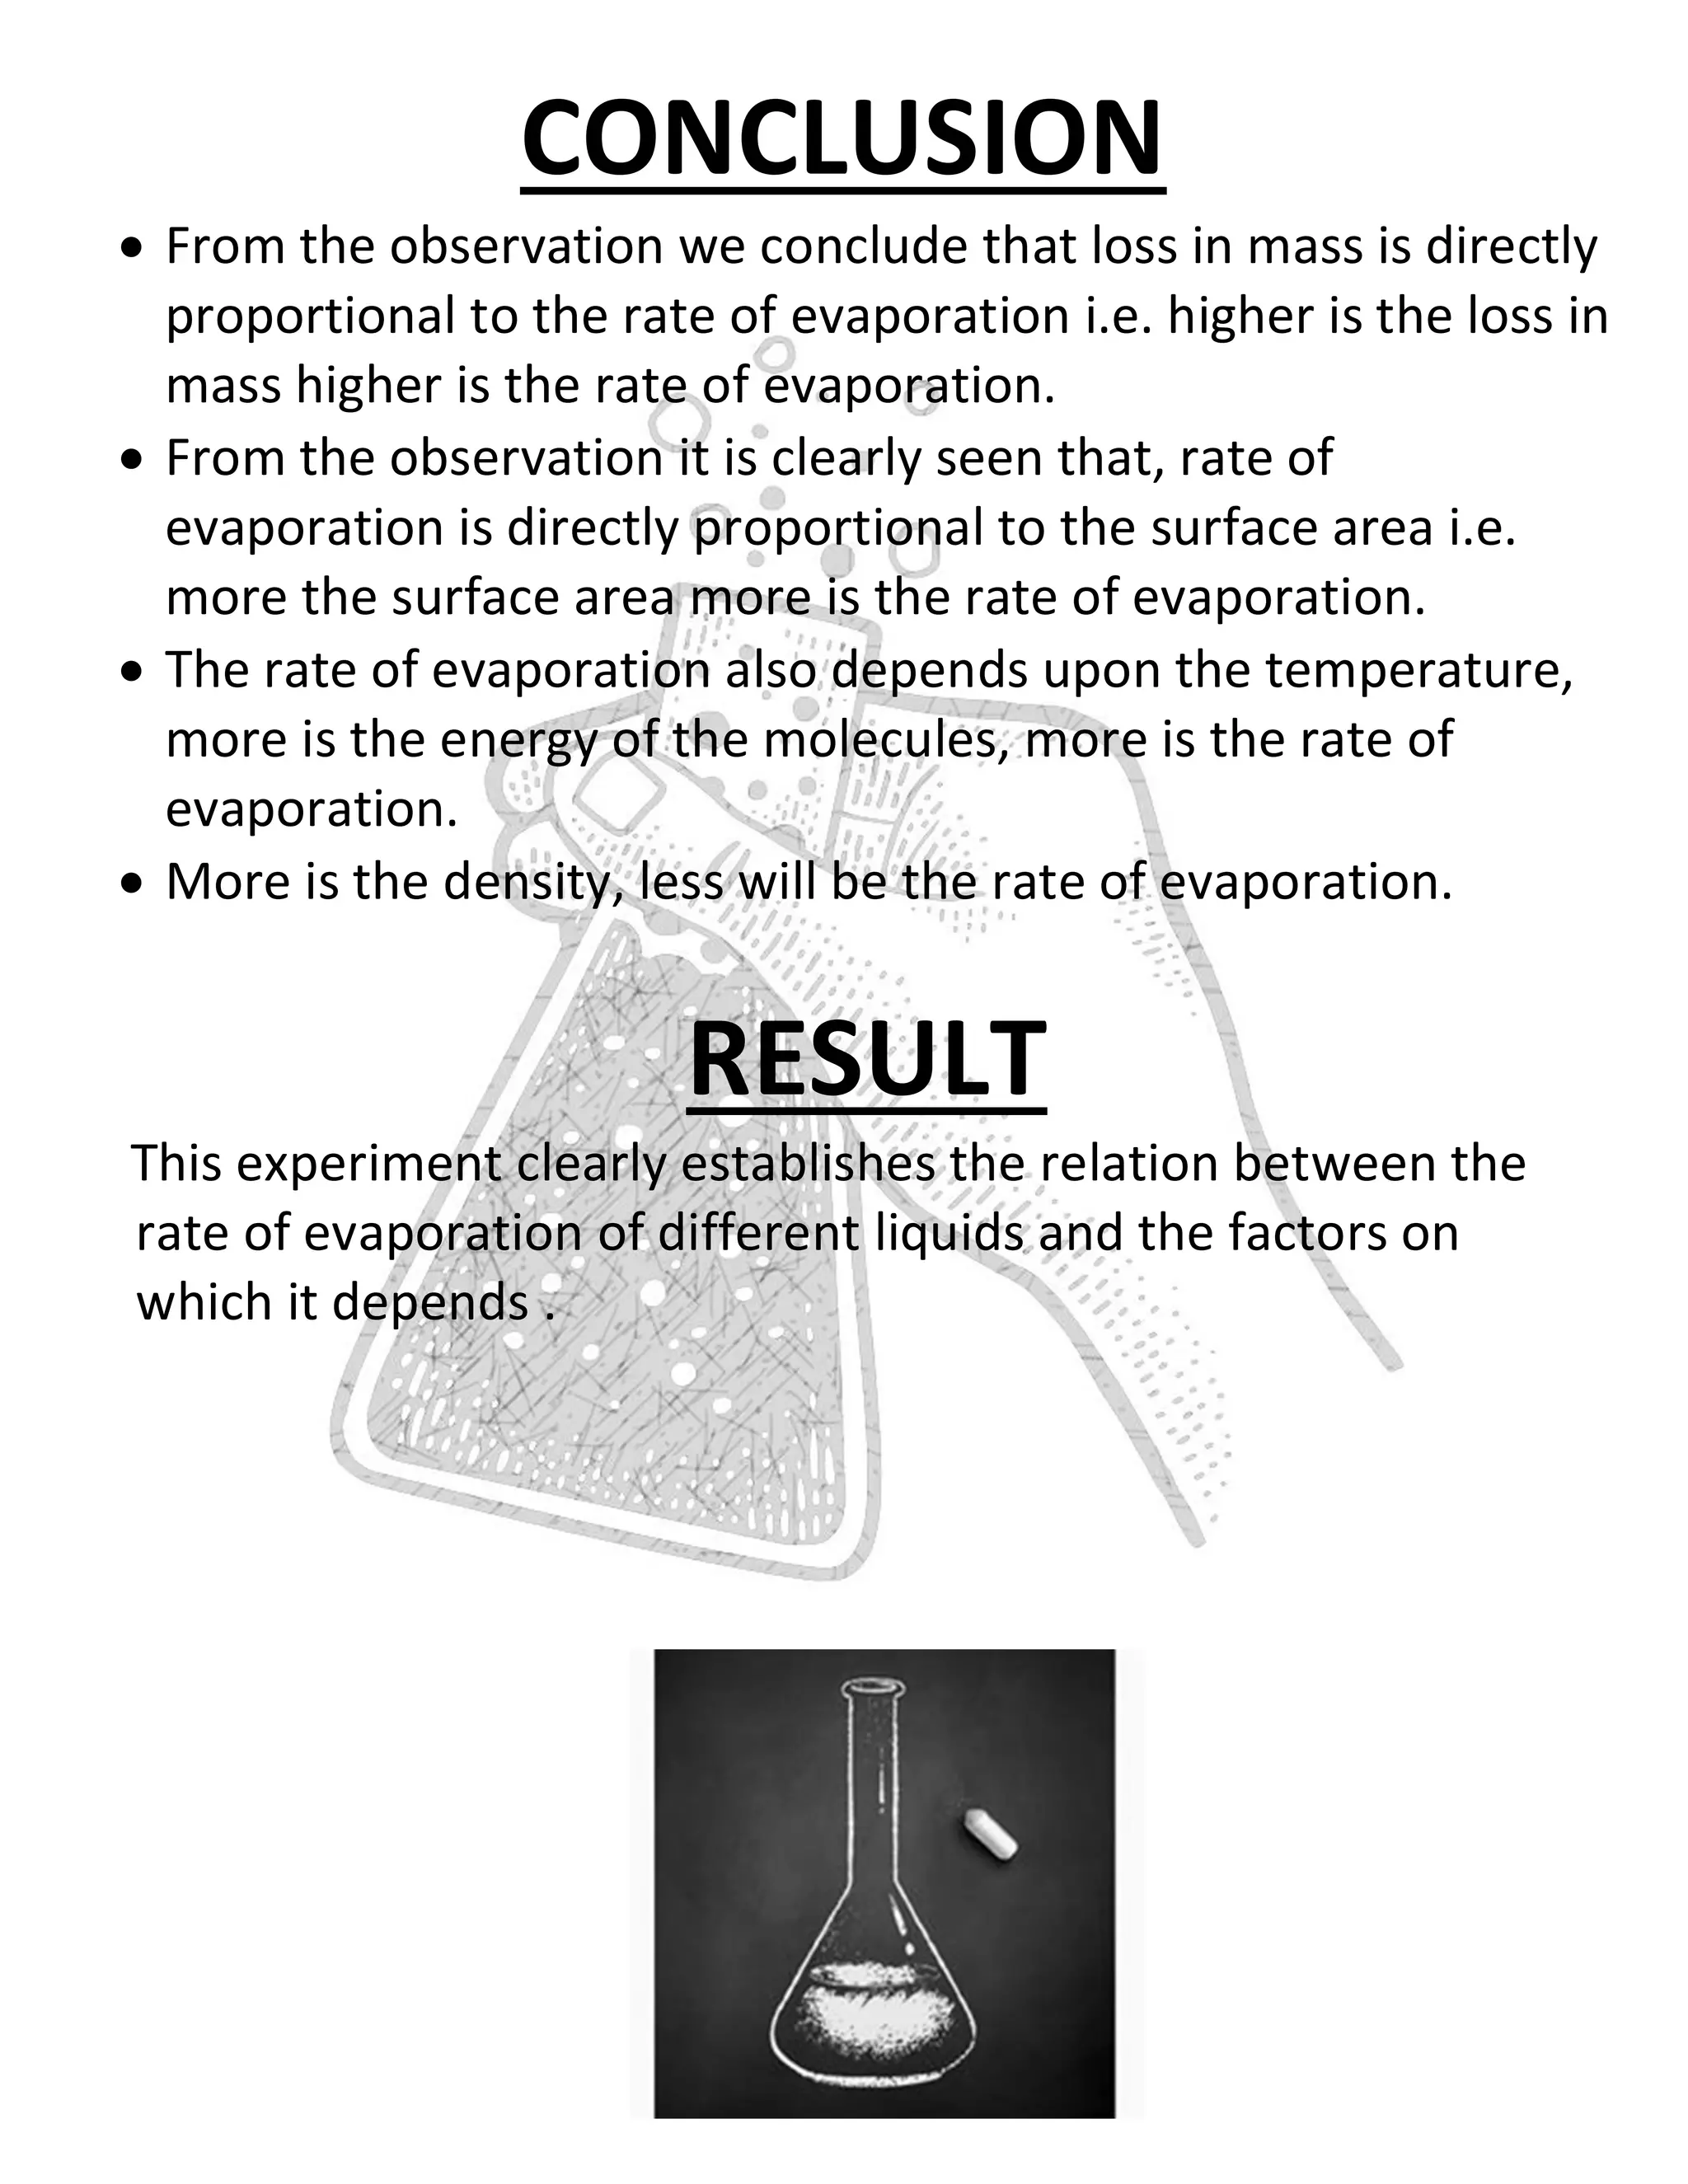 study of the rate of evaporation of different liquids